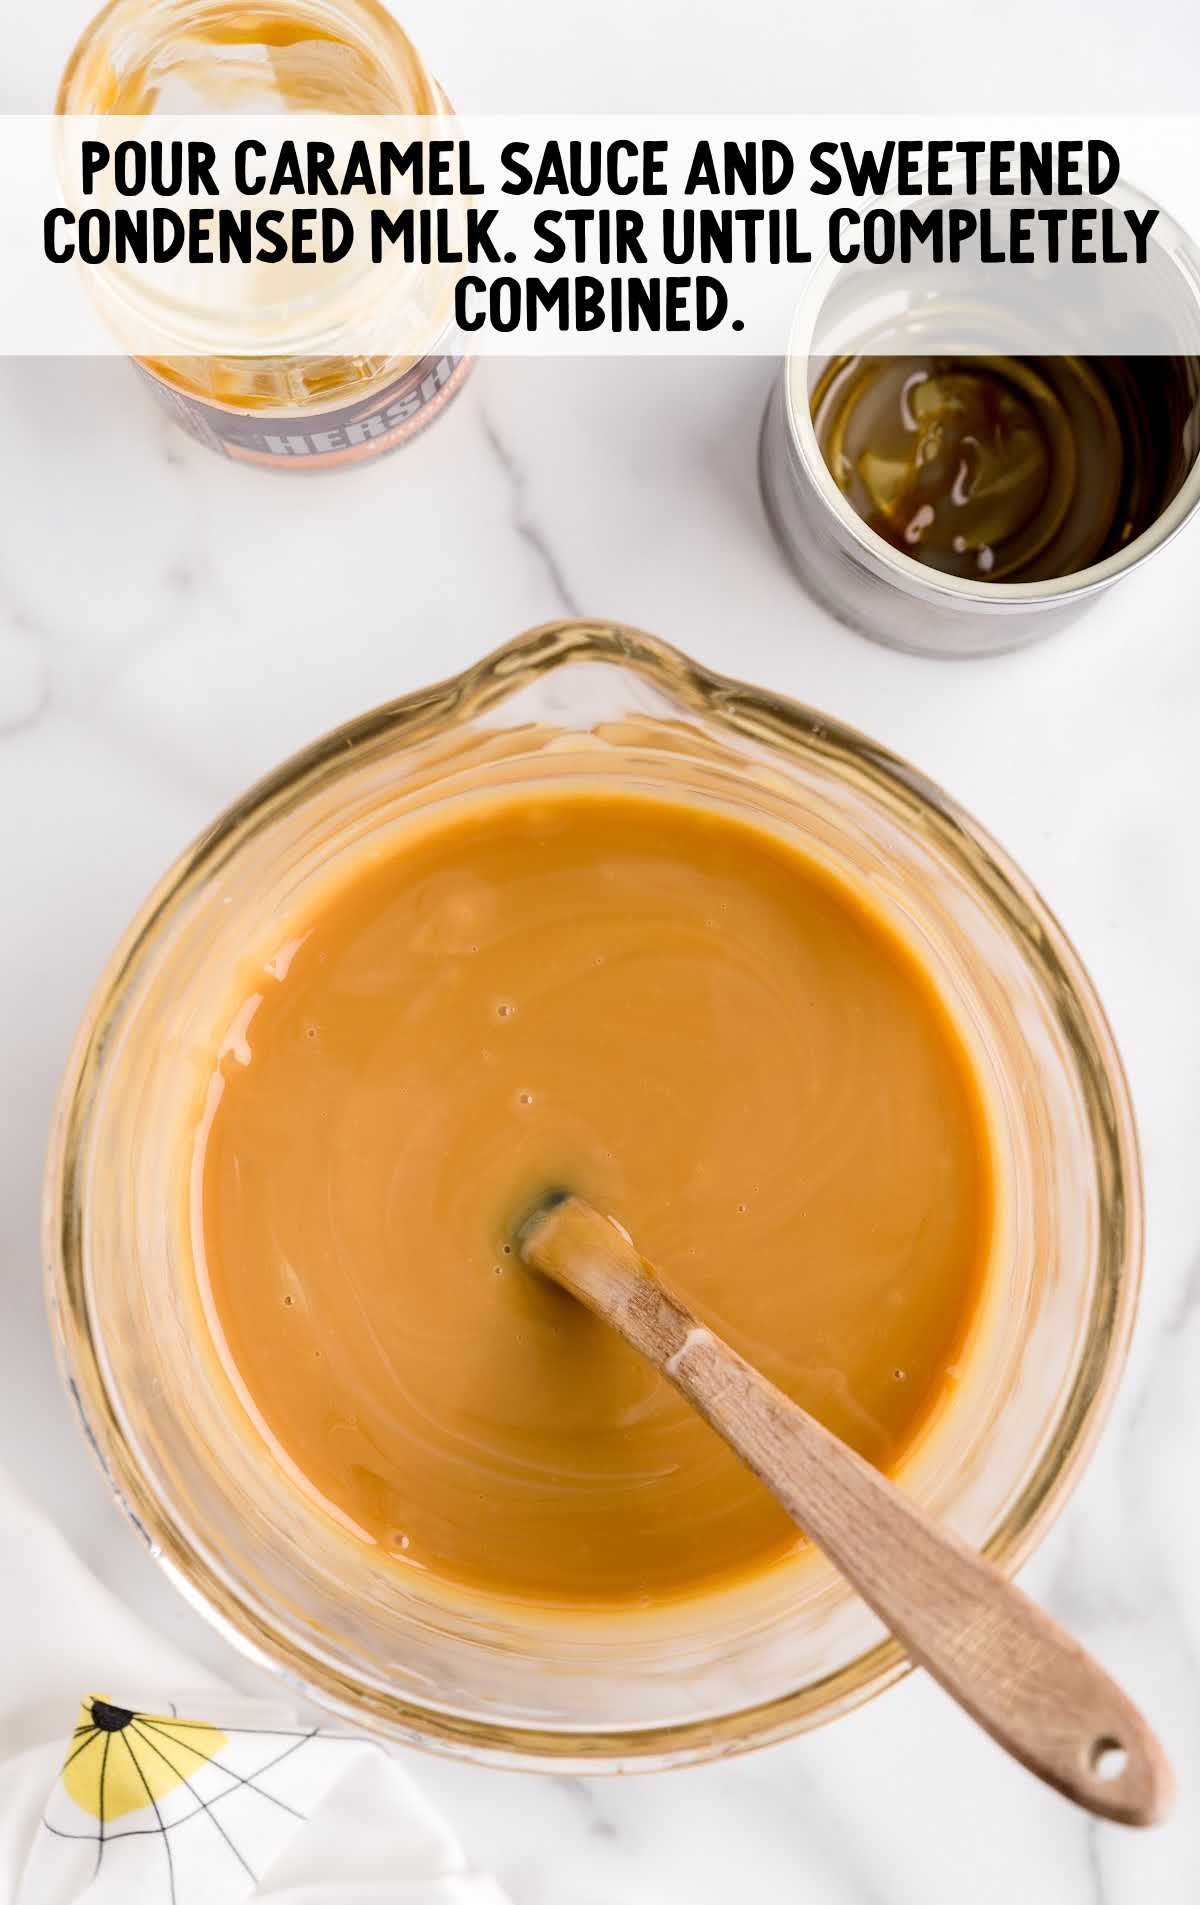 caramel sauce and sweetened condensed milk combined in a bowl